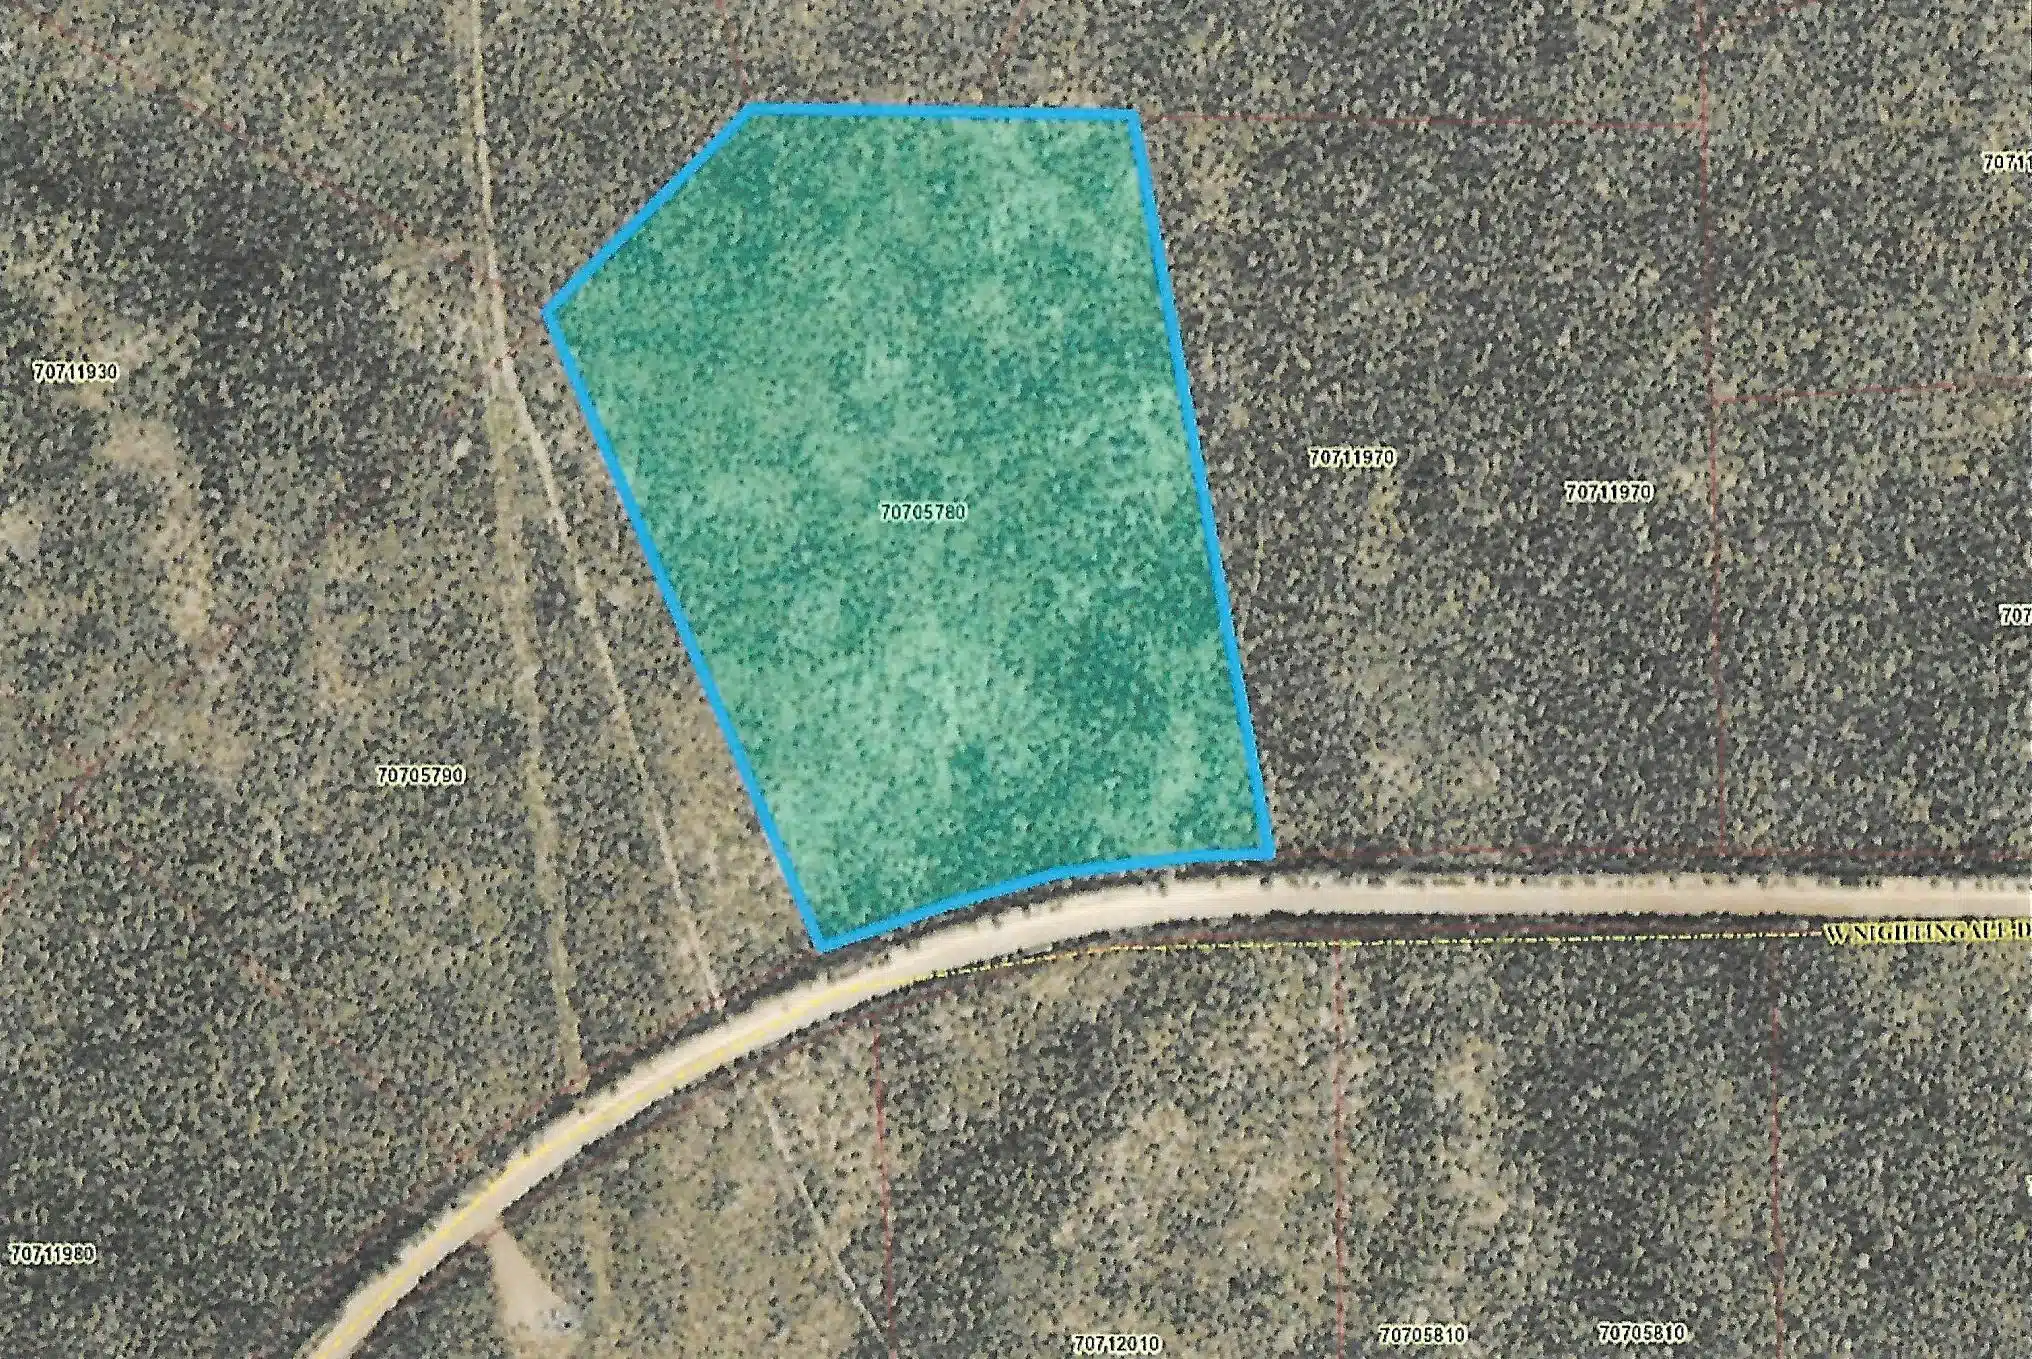 5-Acres-SLNE-W-Nightingale-Drive-Lot-14-Aerial-Map-Scan